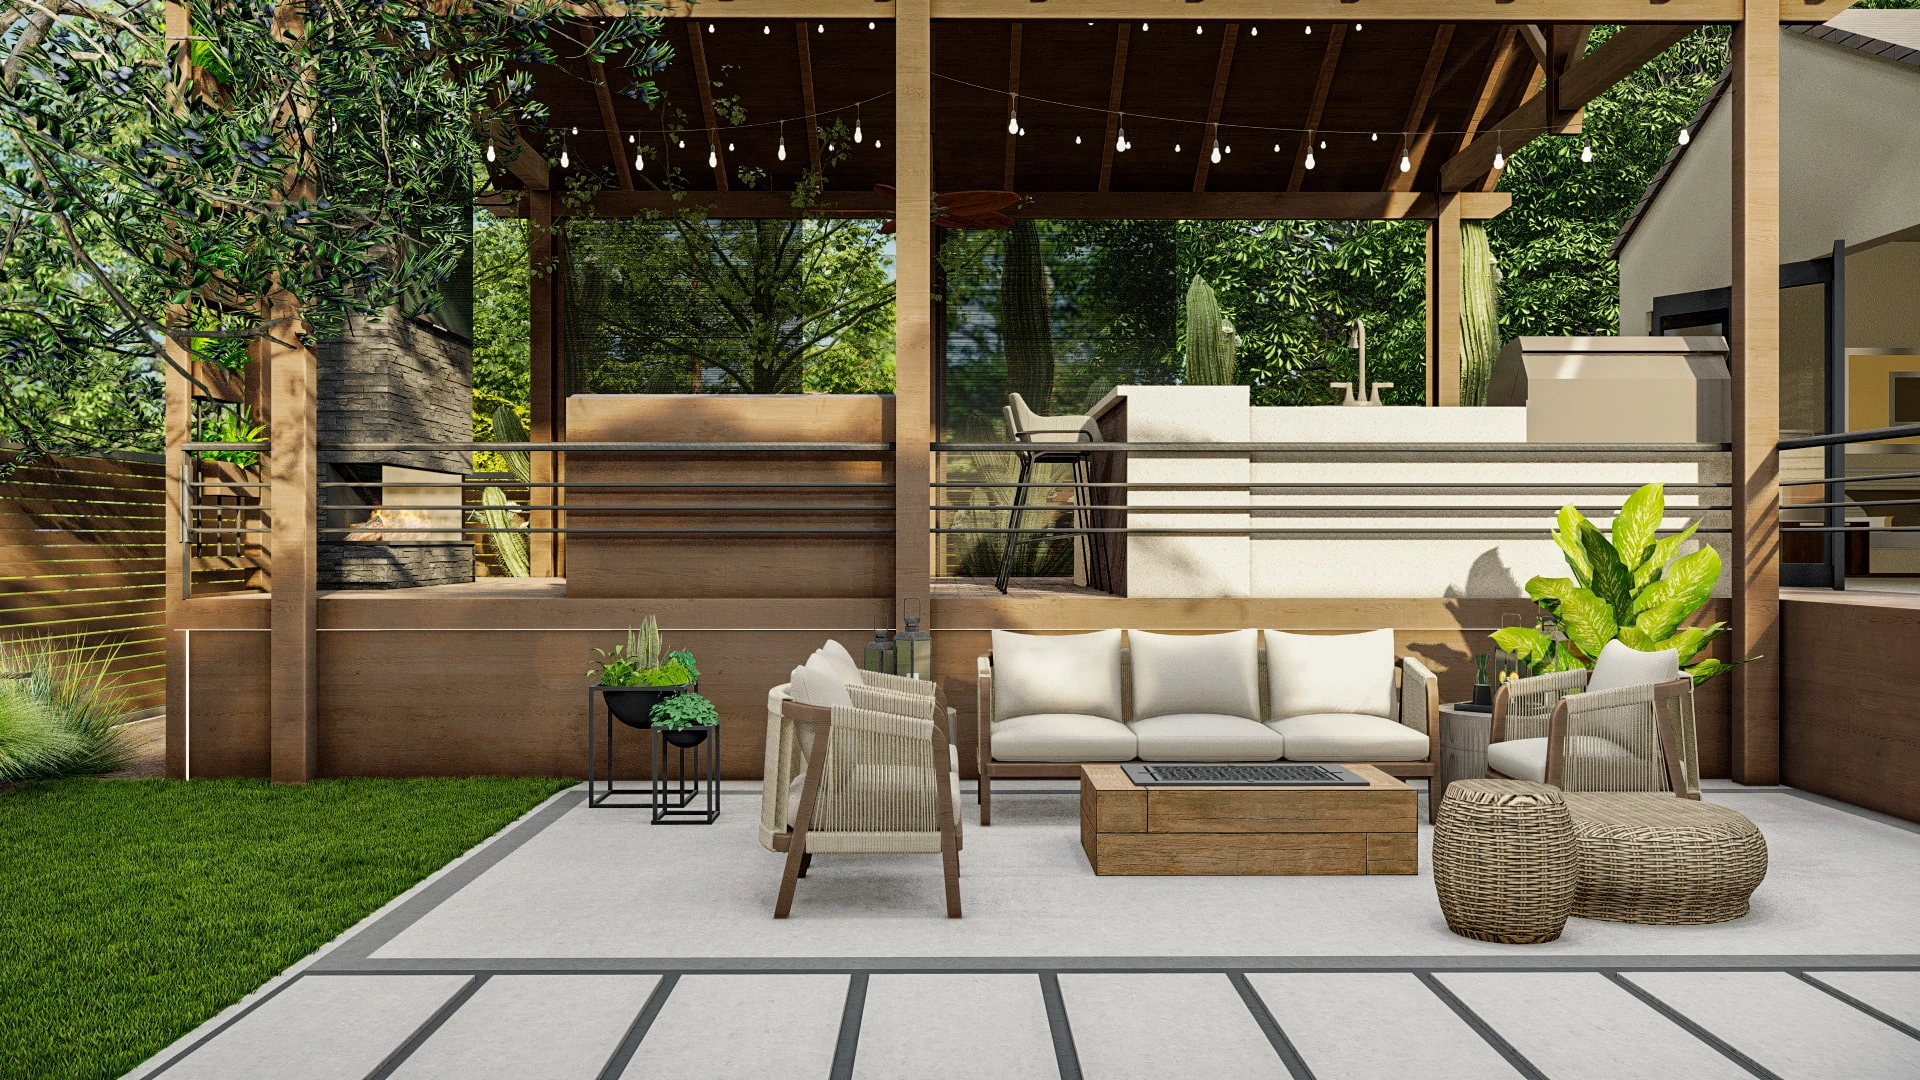 Inviting outdoor seating area with modern furniture under a pergola